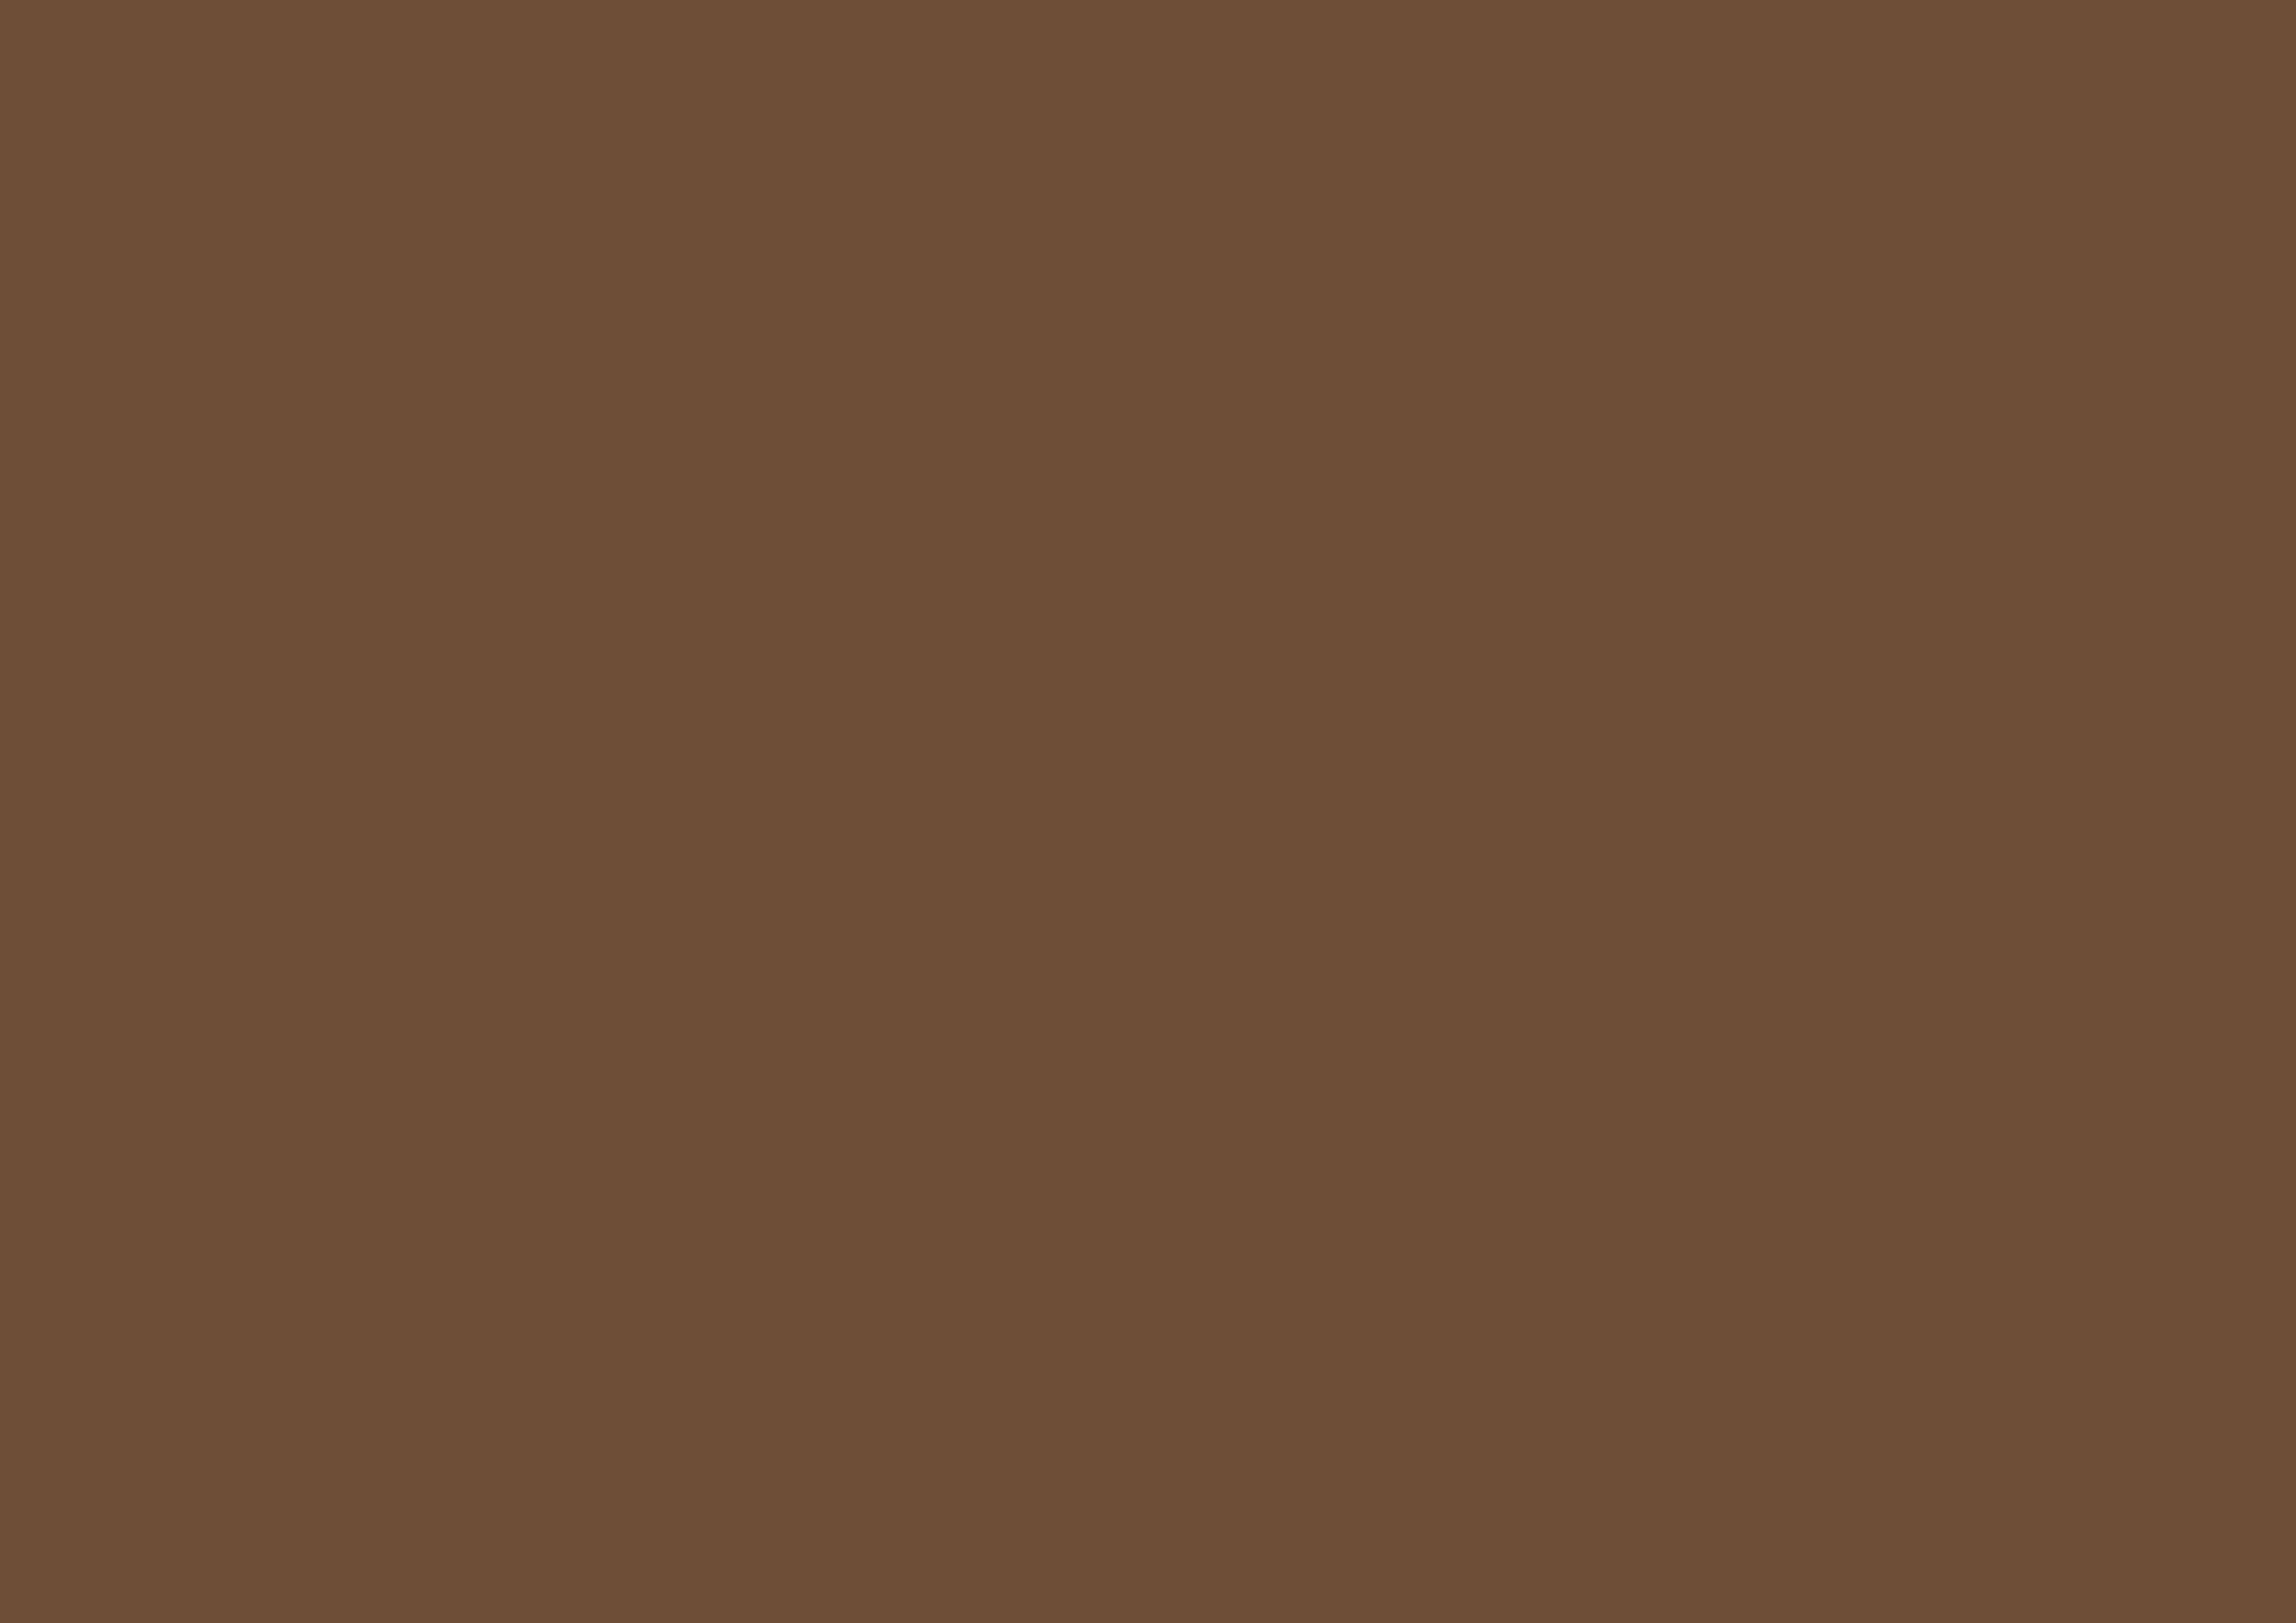 3508x2480 Coffee Solid Color Background